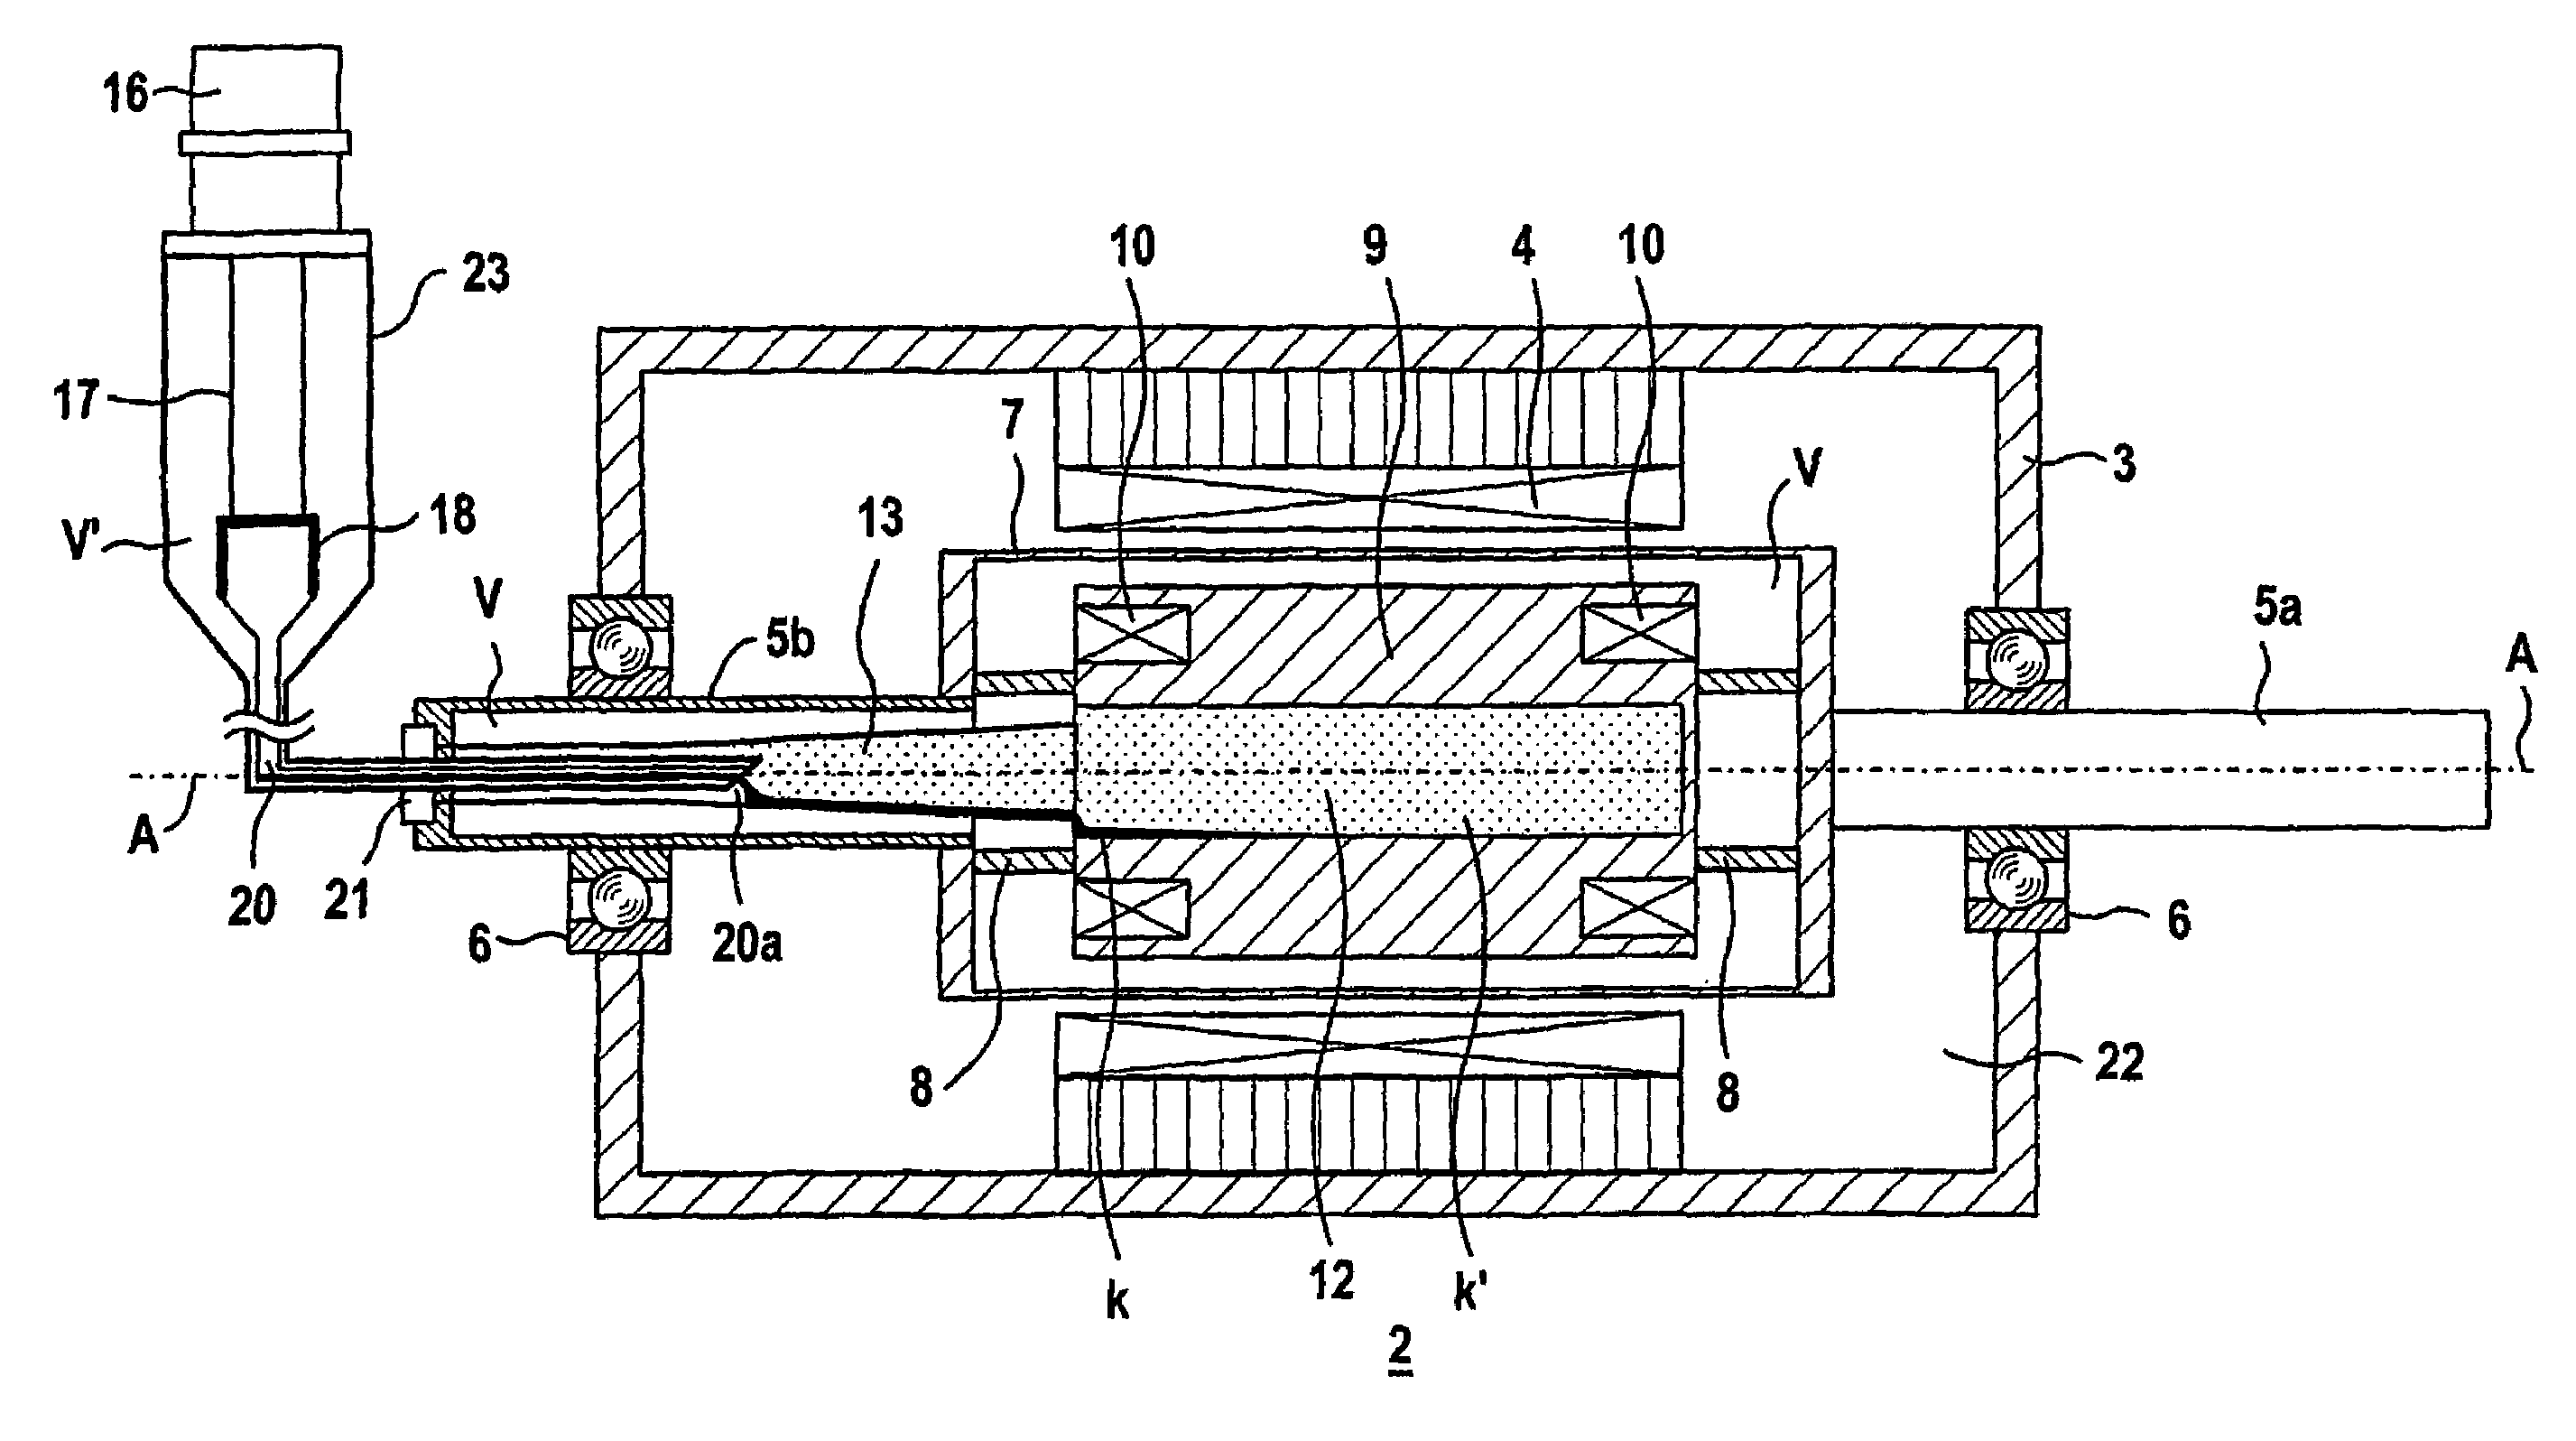 Superconducting device with a cooling-unit cold head thermally coupled to a rotating superconductive winding